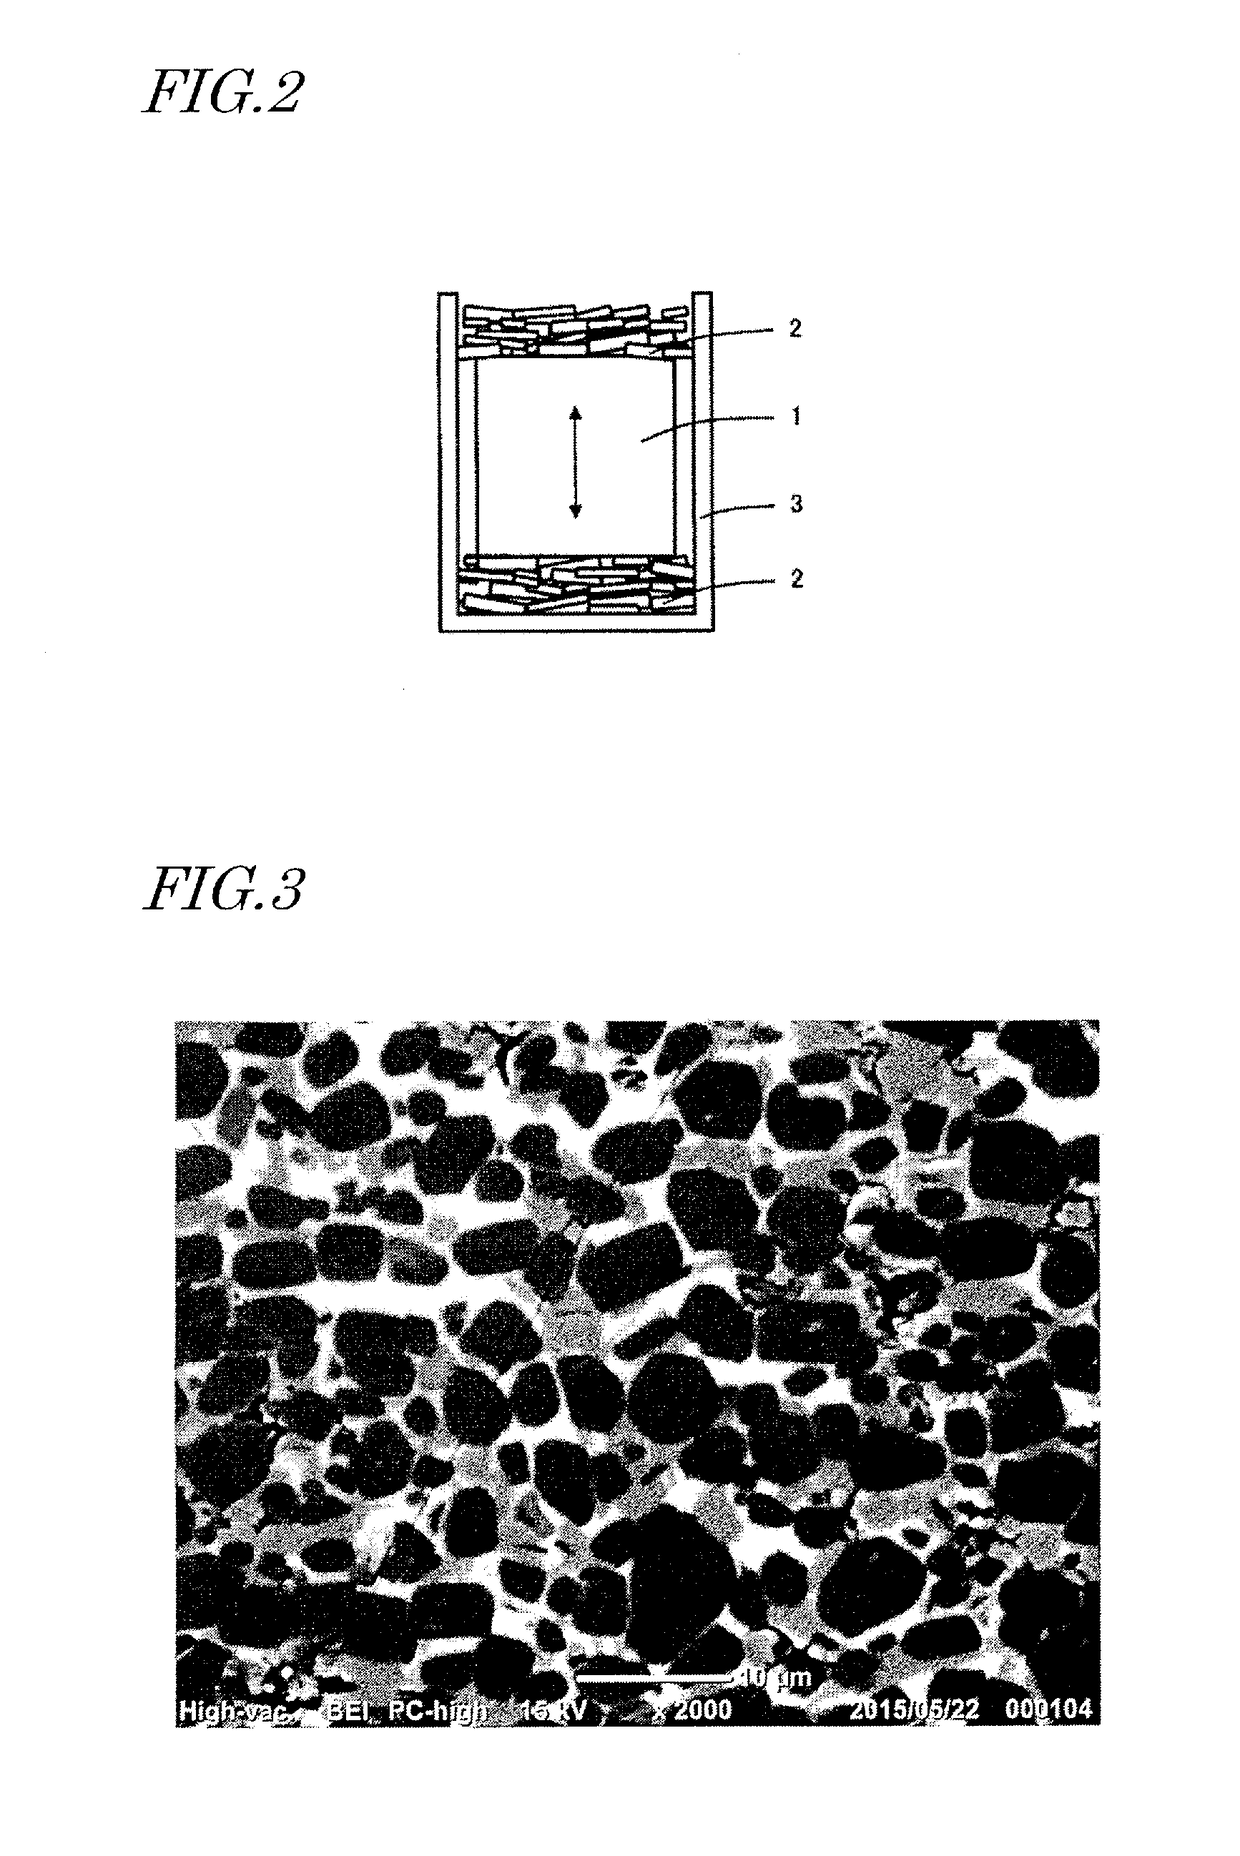 Method for producing r-t-b system sintered magnet